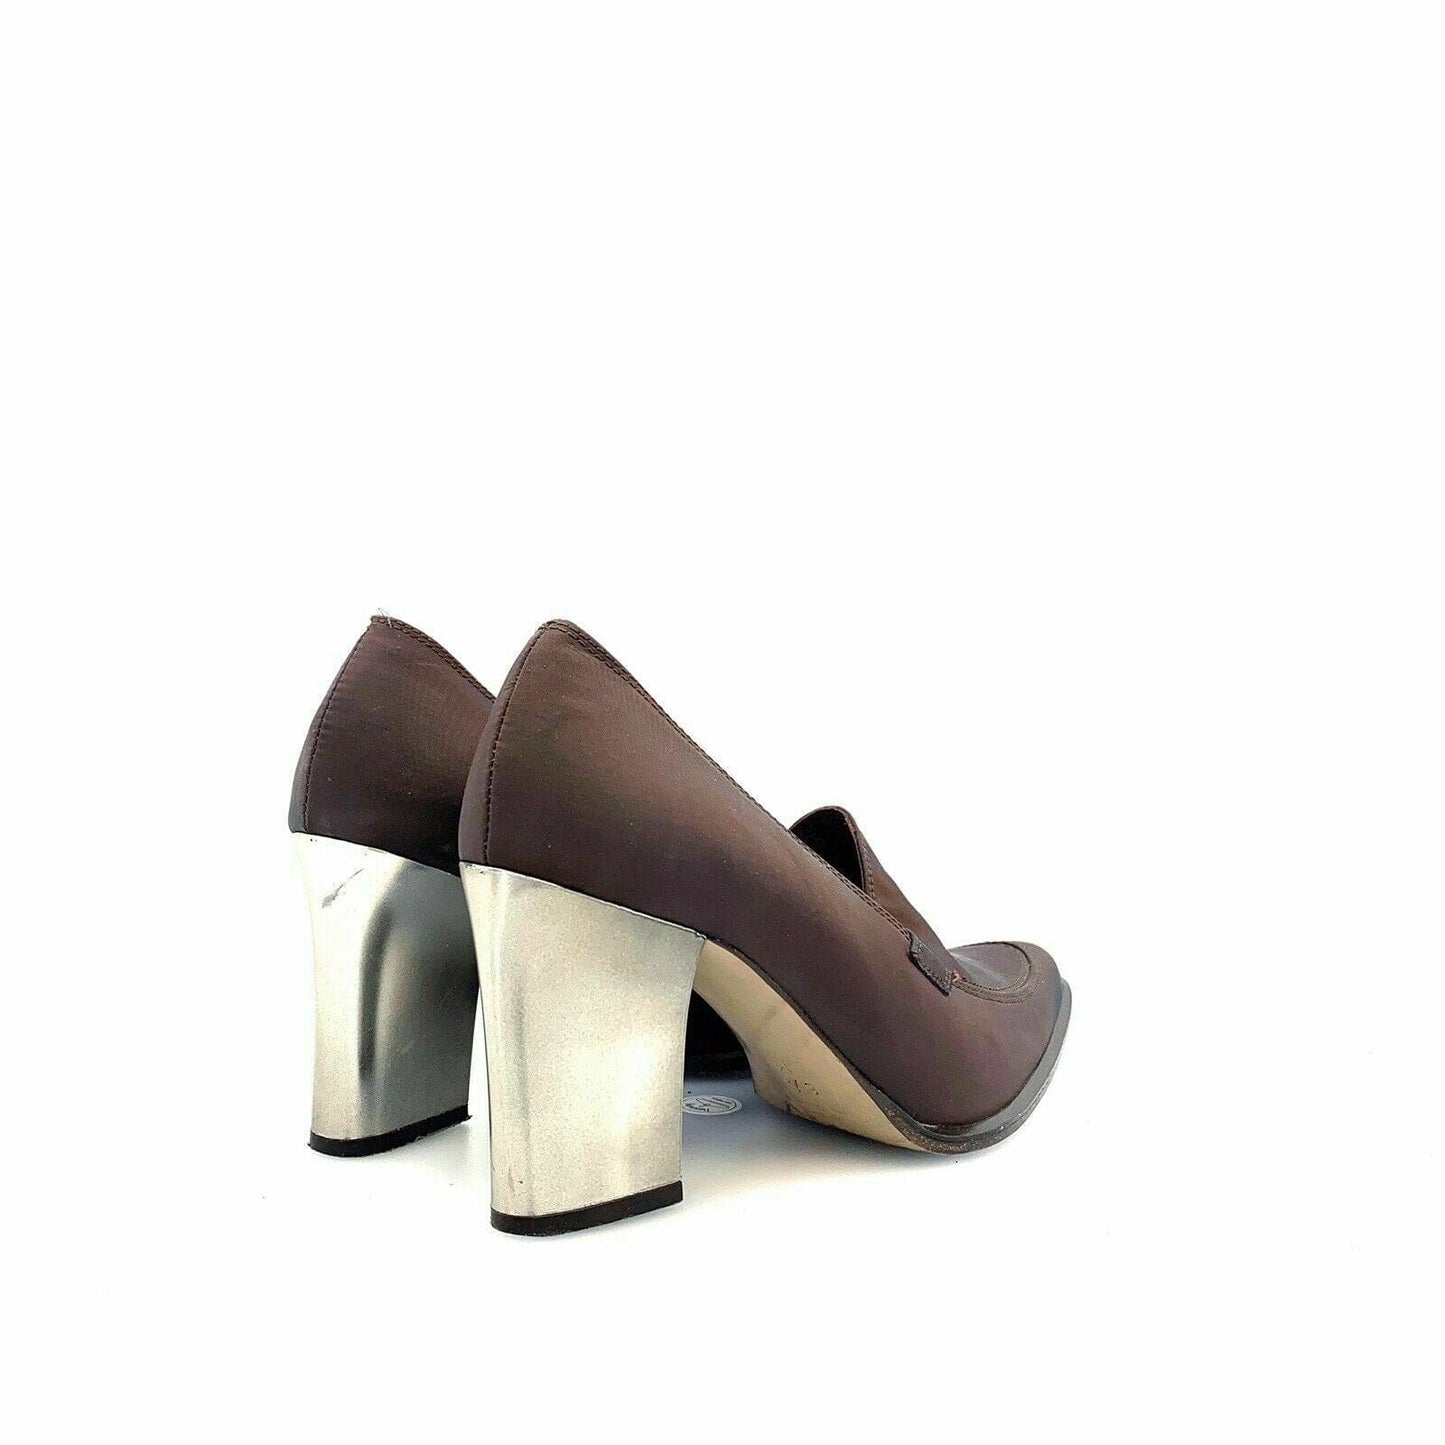 Elegant Enzo Angiolini Womens Pointed Toe Shoes Must-Have Metallic Heel Brown Size 6.5M EUC